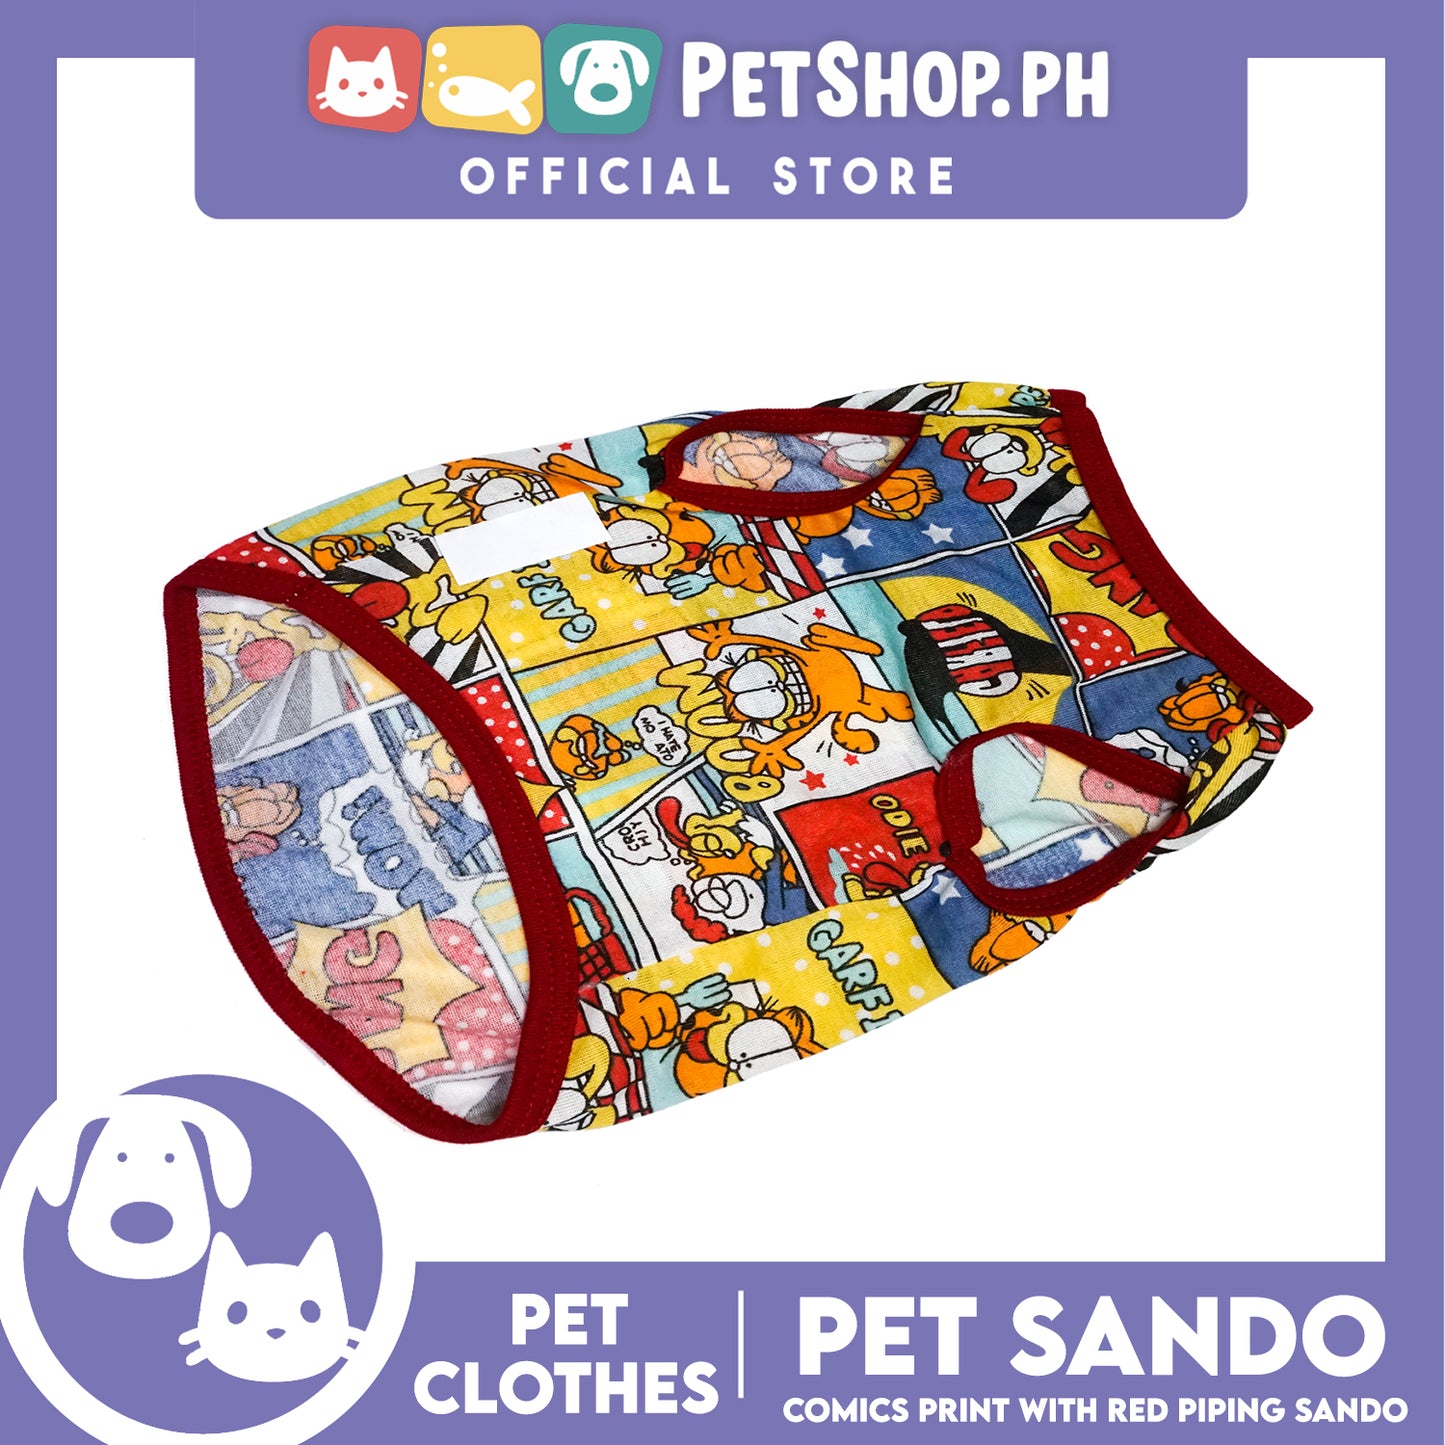 Pet Sando Comics Print with Red Piping (Large) Pet Shirt Clothes Perfect fit for Dogs